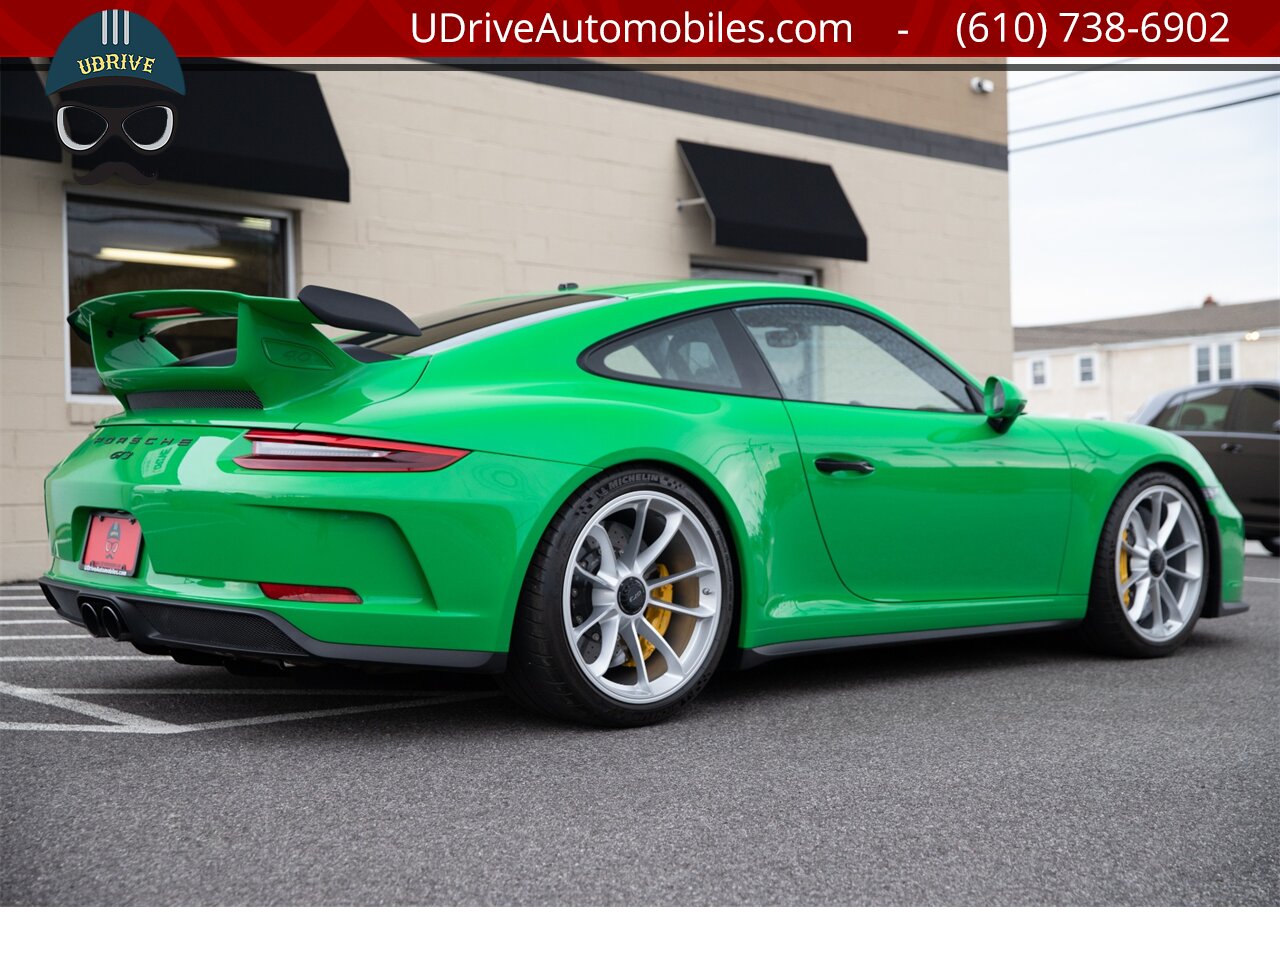 2018 Porsche 911 GT3 6 Speed Paint To Sample Viper Green 48 Miles  Front Axle Lift PCCB Carbon Bucket Seats - Photo 18 - West Chester, PA 19382